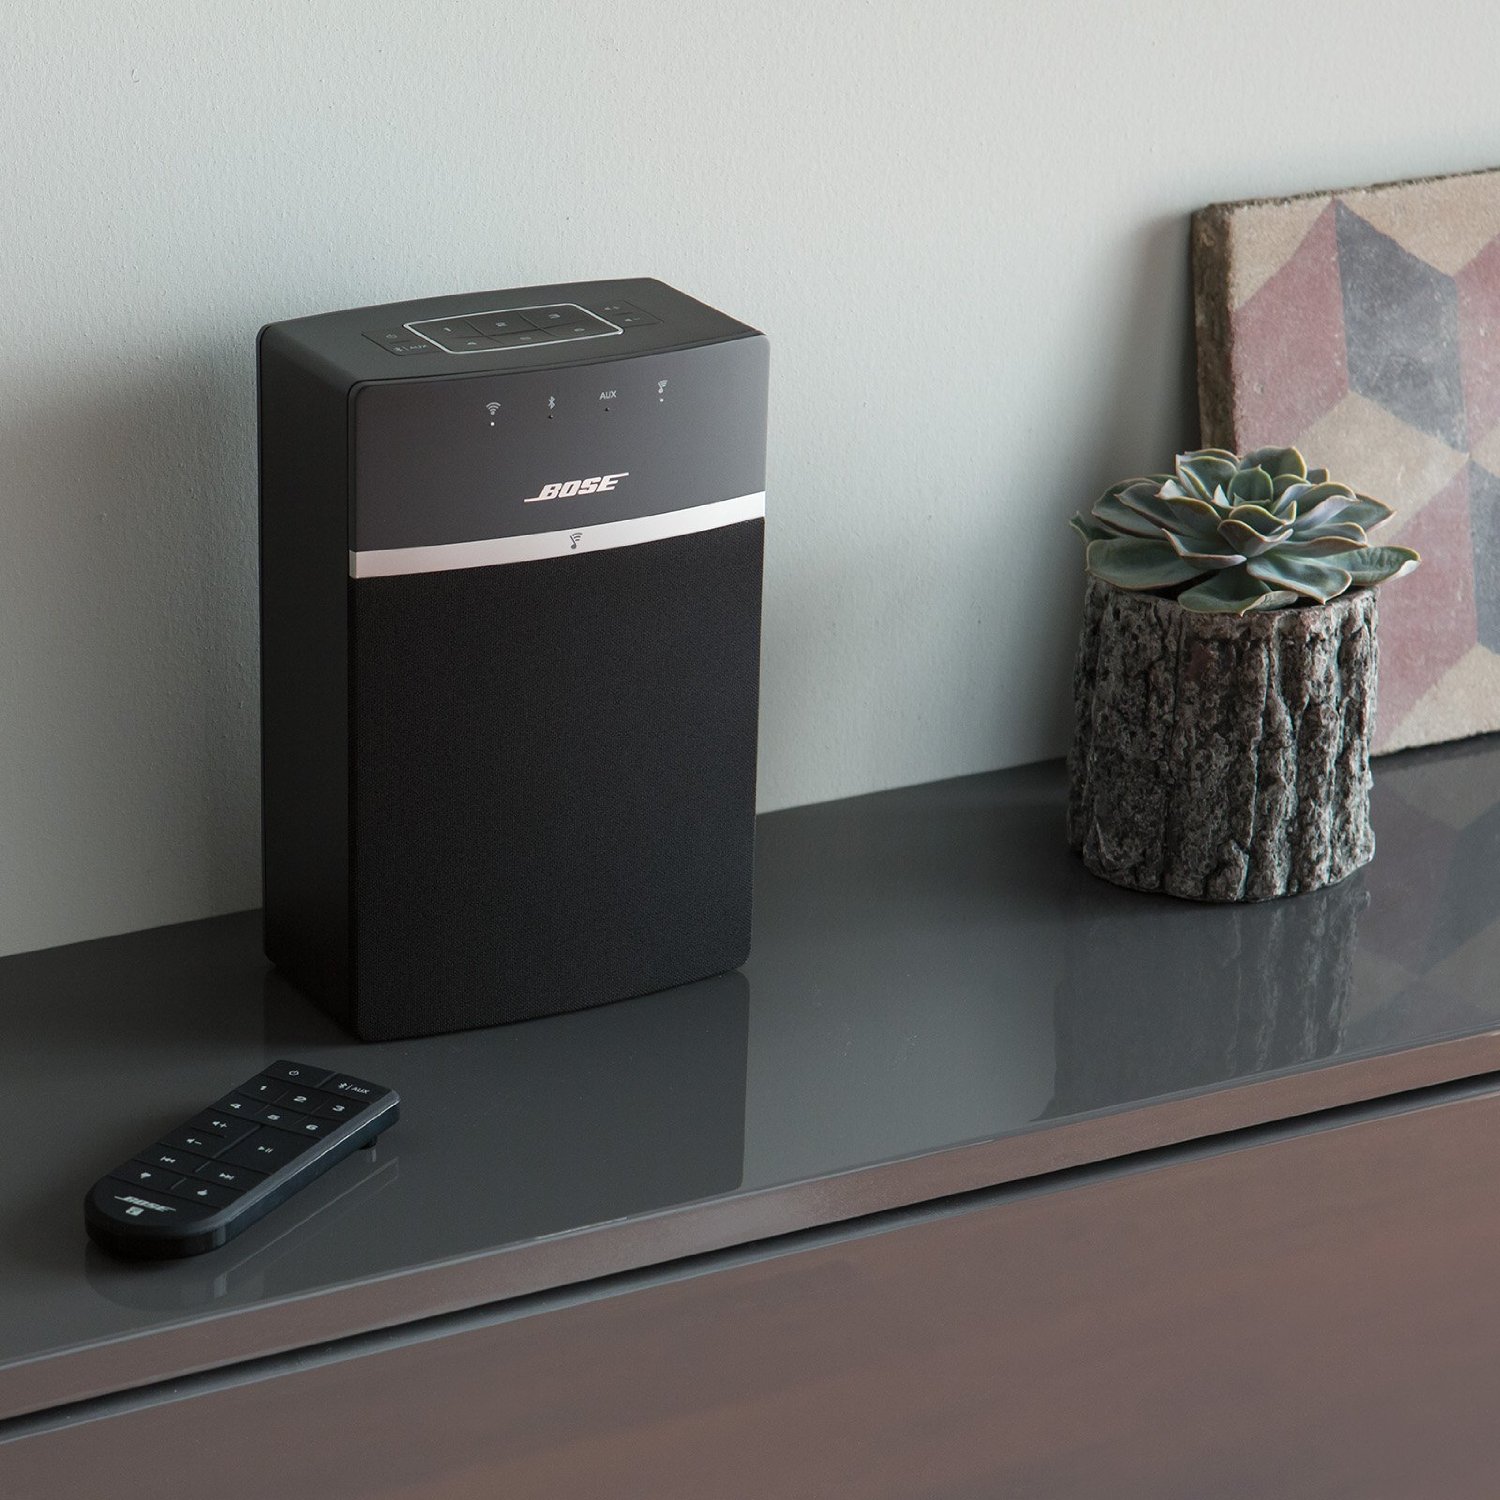 Loa không dây Bose SoundTouch 10 Wireless Music System